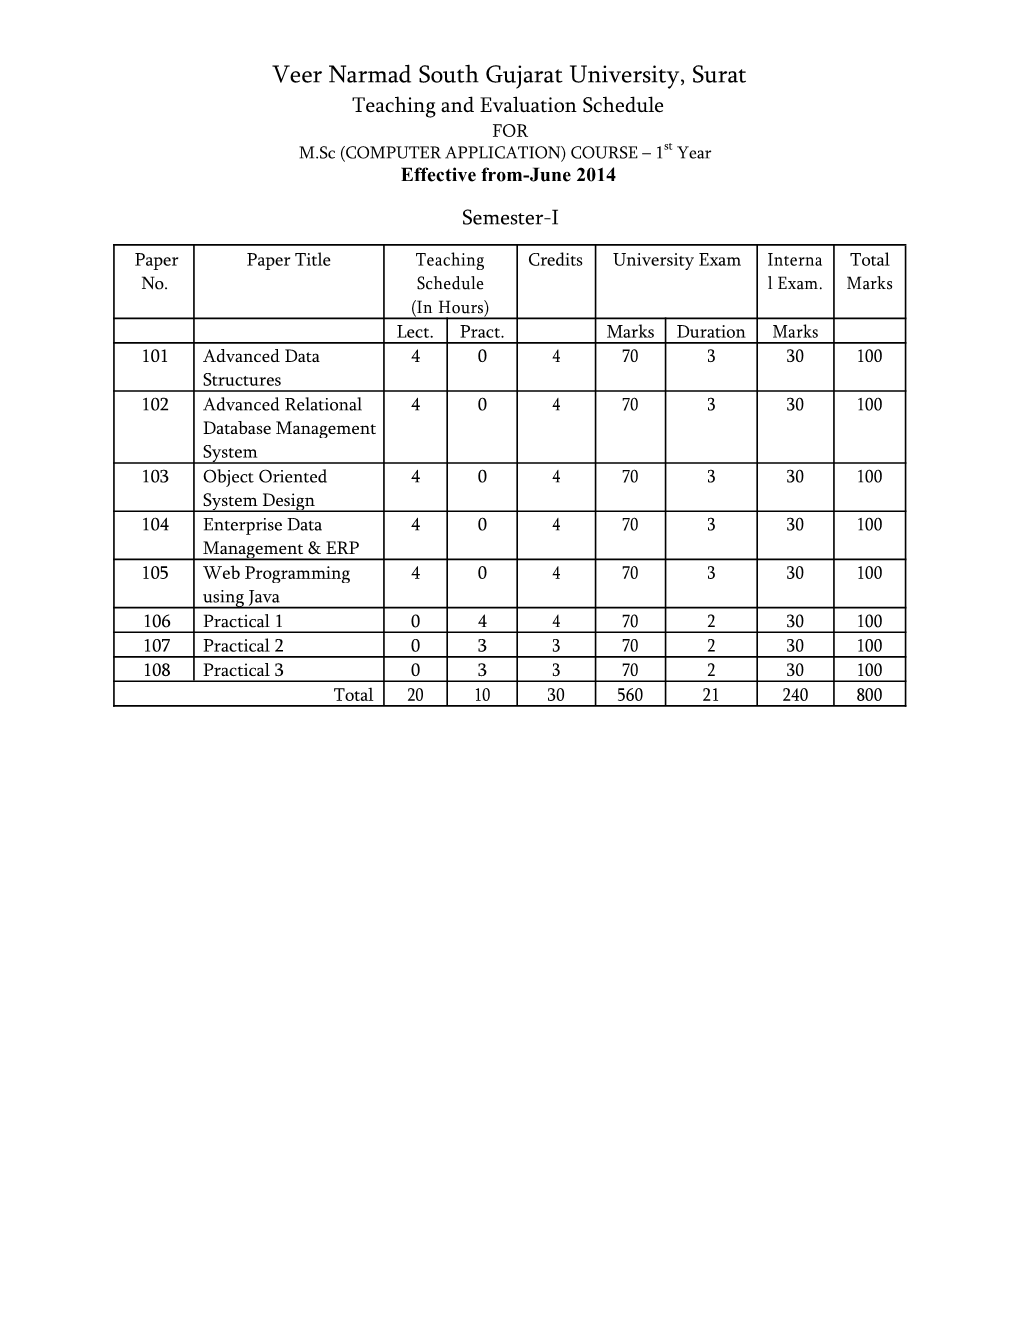 Veer Narmad South Gujarat University, Surat Teaching and Evaluation Schedule for M.Sc (COMPUTER APPLICATION) COURSE – 1St Year Effective From-June 2014 Semester-I